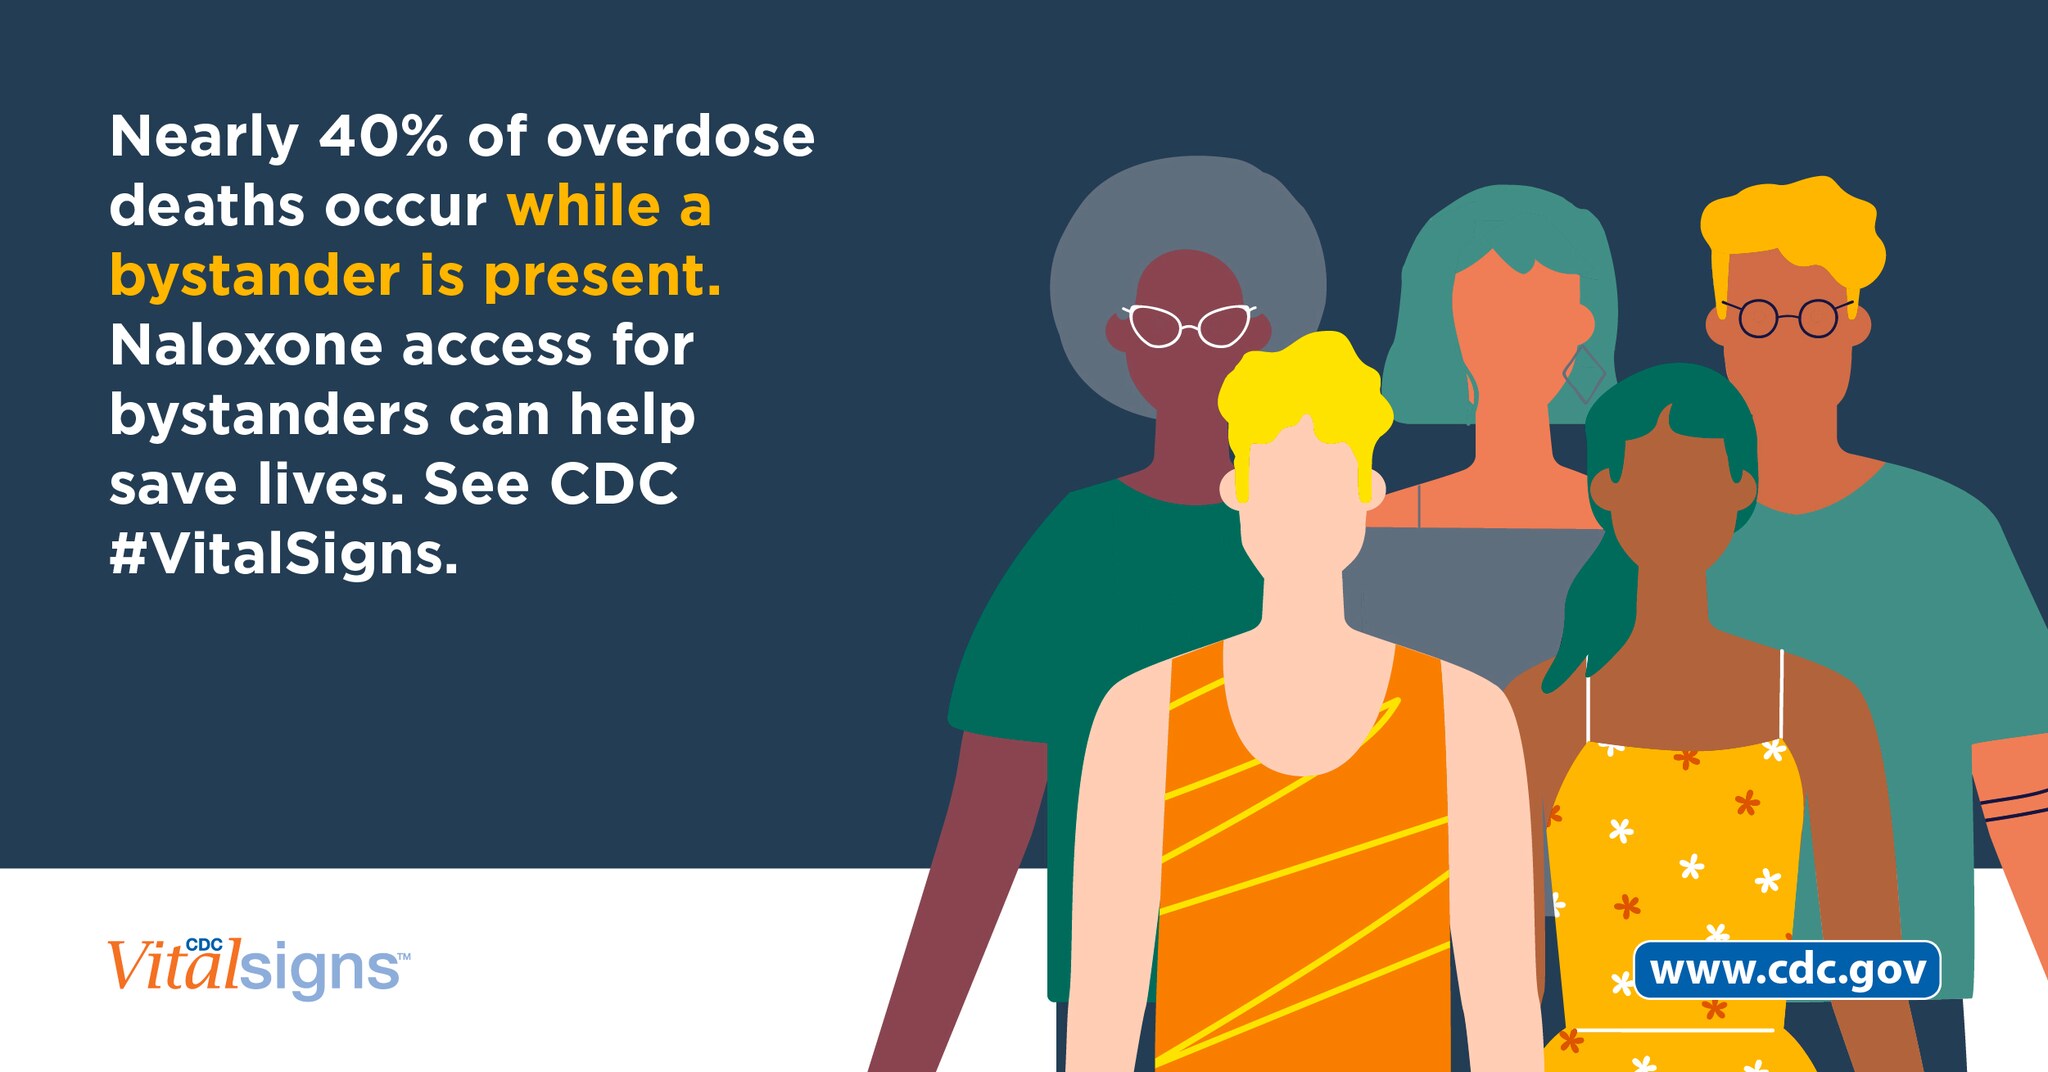 Nearly 40 percent of overdose deaths occur while a bystander is present. Nalozone access for bystanders can help save lives. See CDC #vitalsigns.